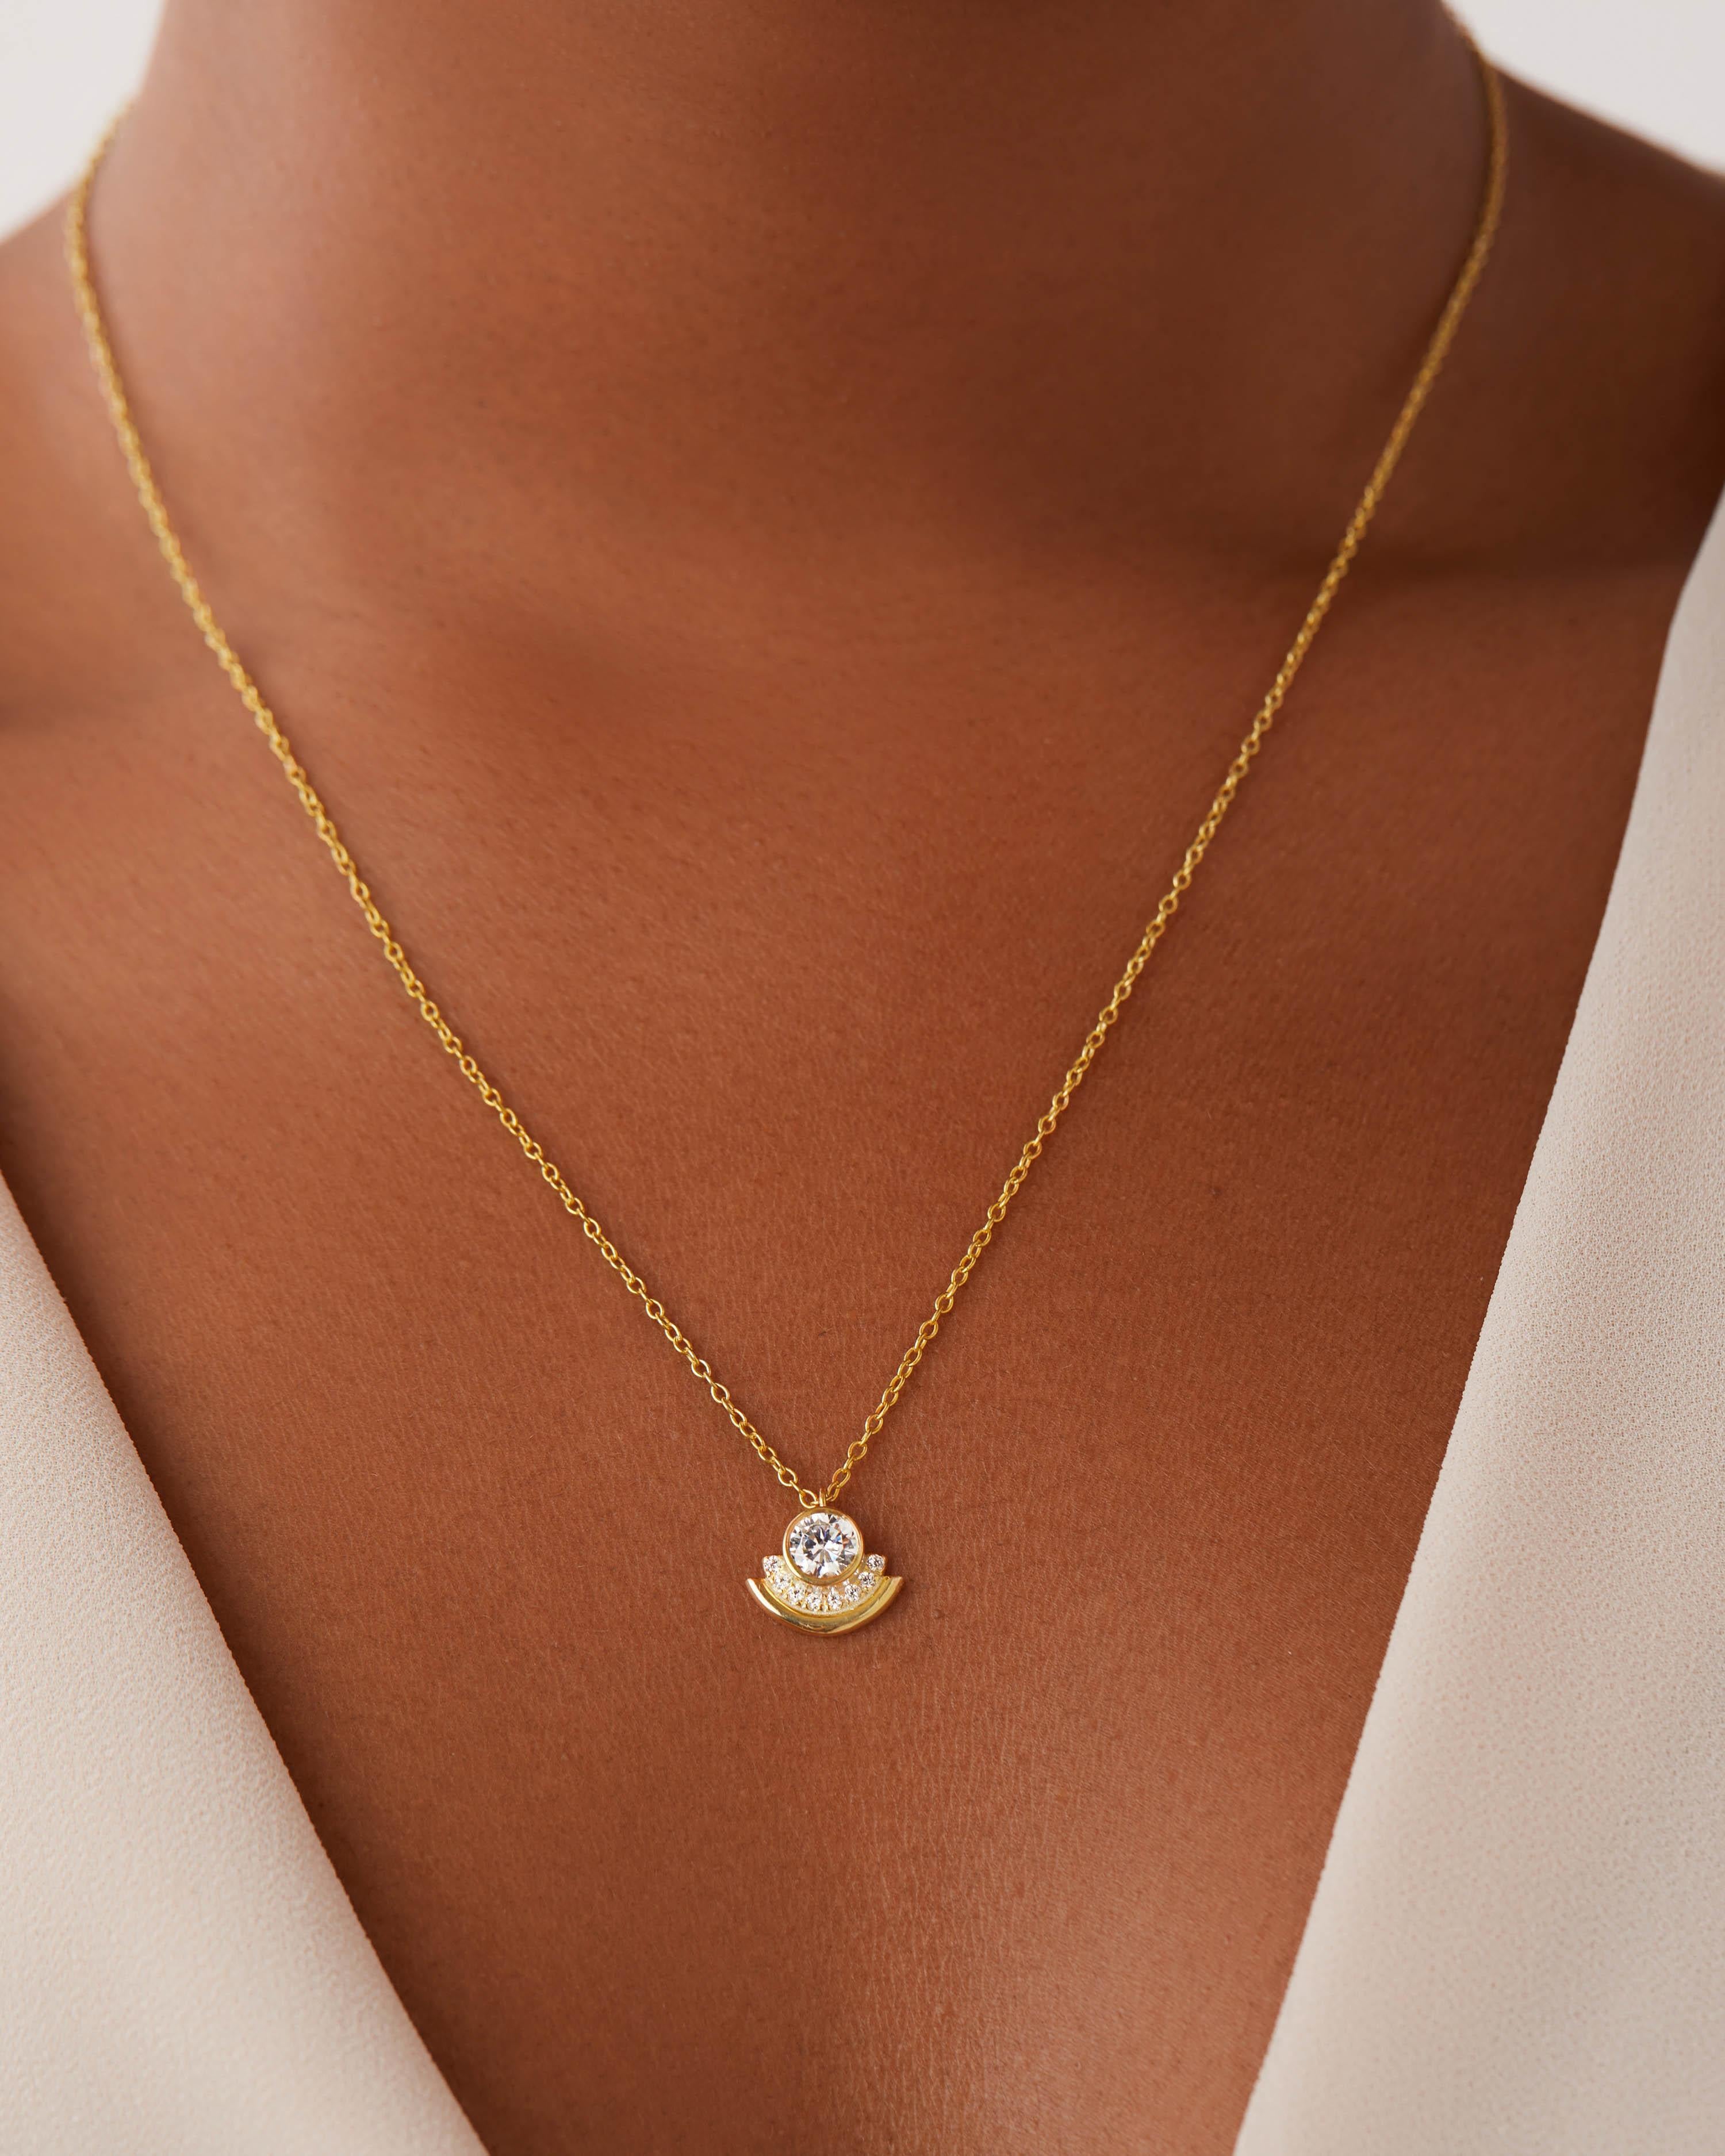 Contemporary Casey Perez Gold Arc Necklace with .8 carats of Brilliant Cut Diamonds For Sale